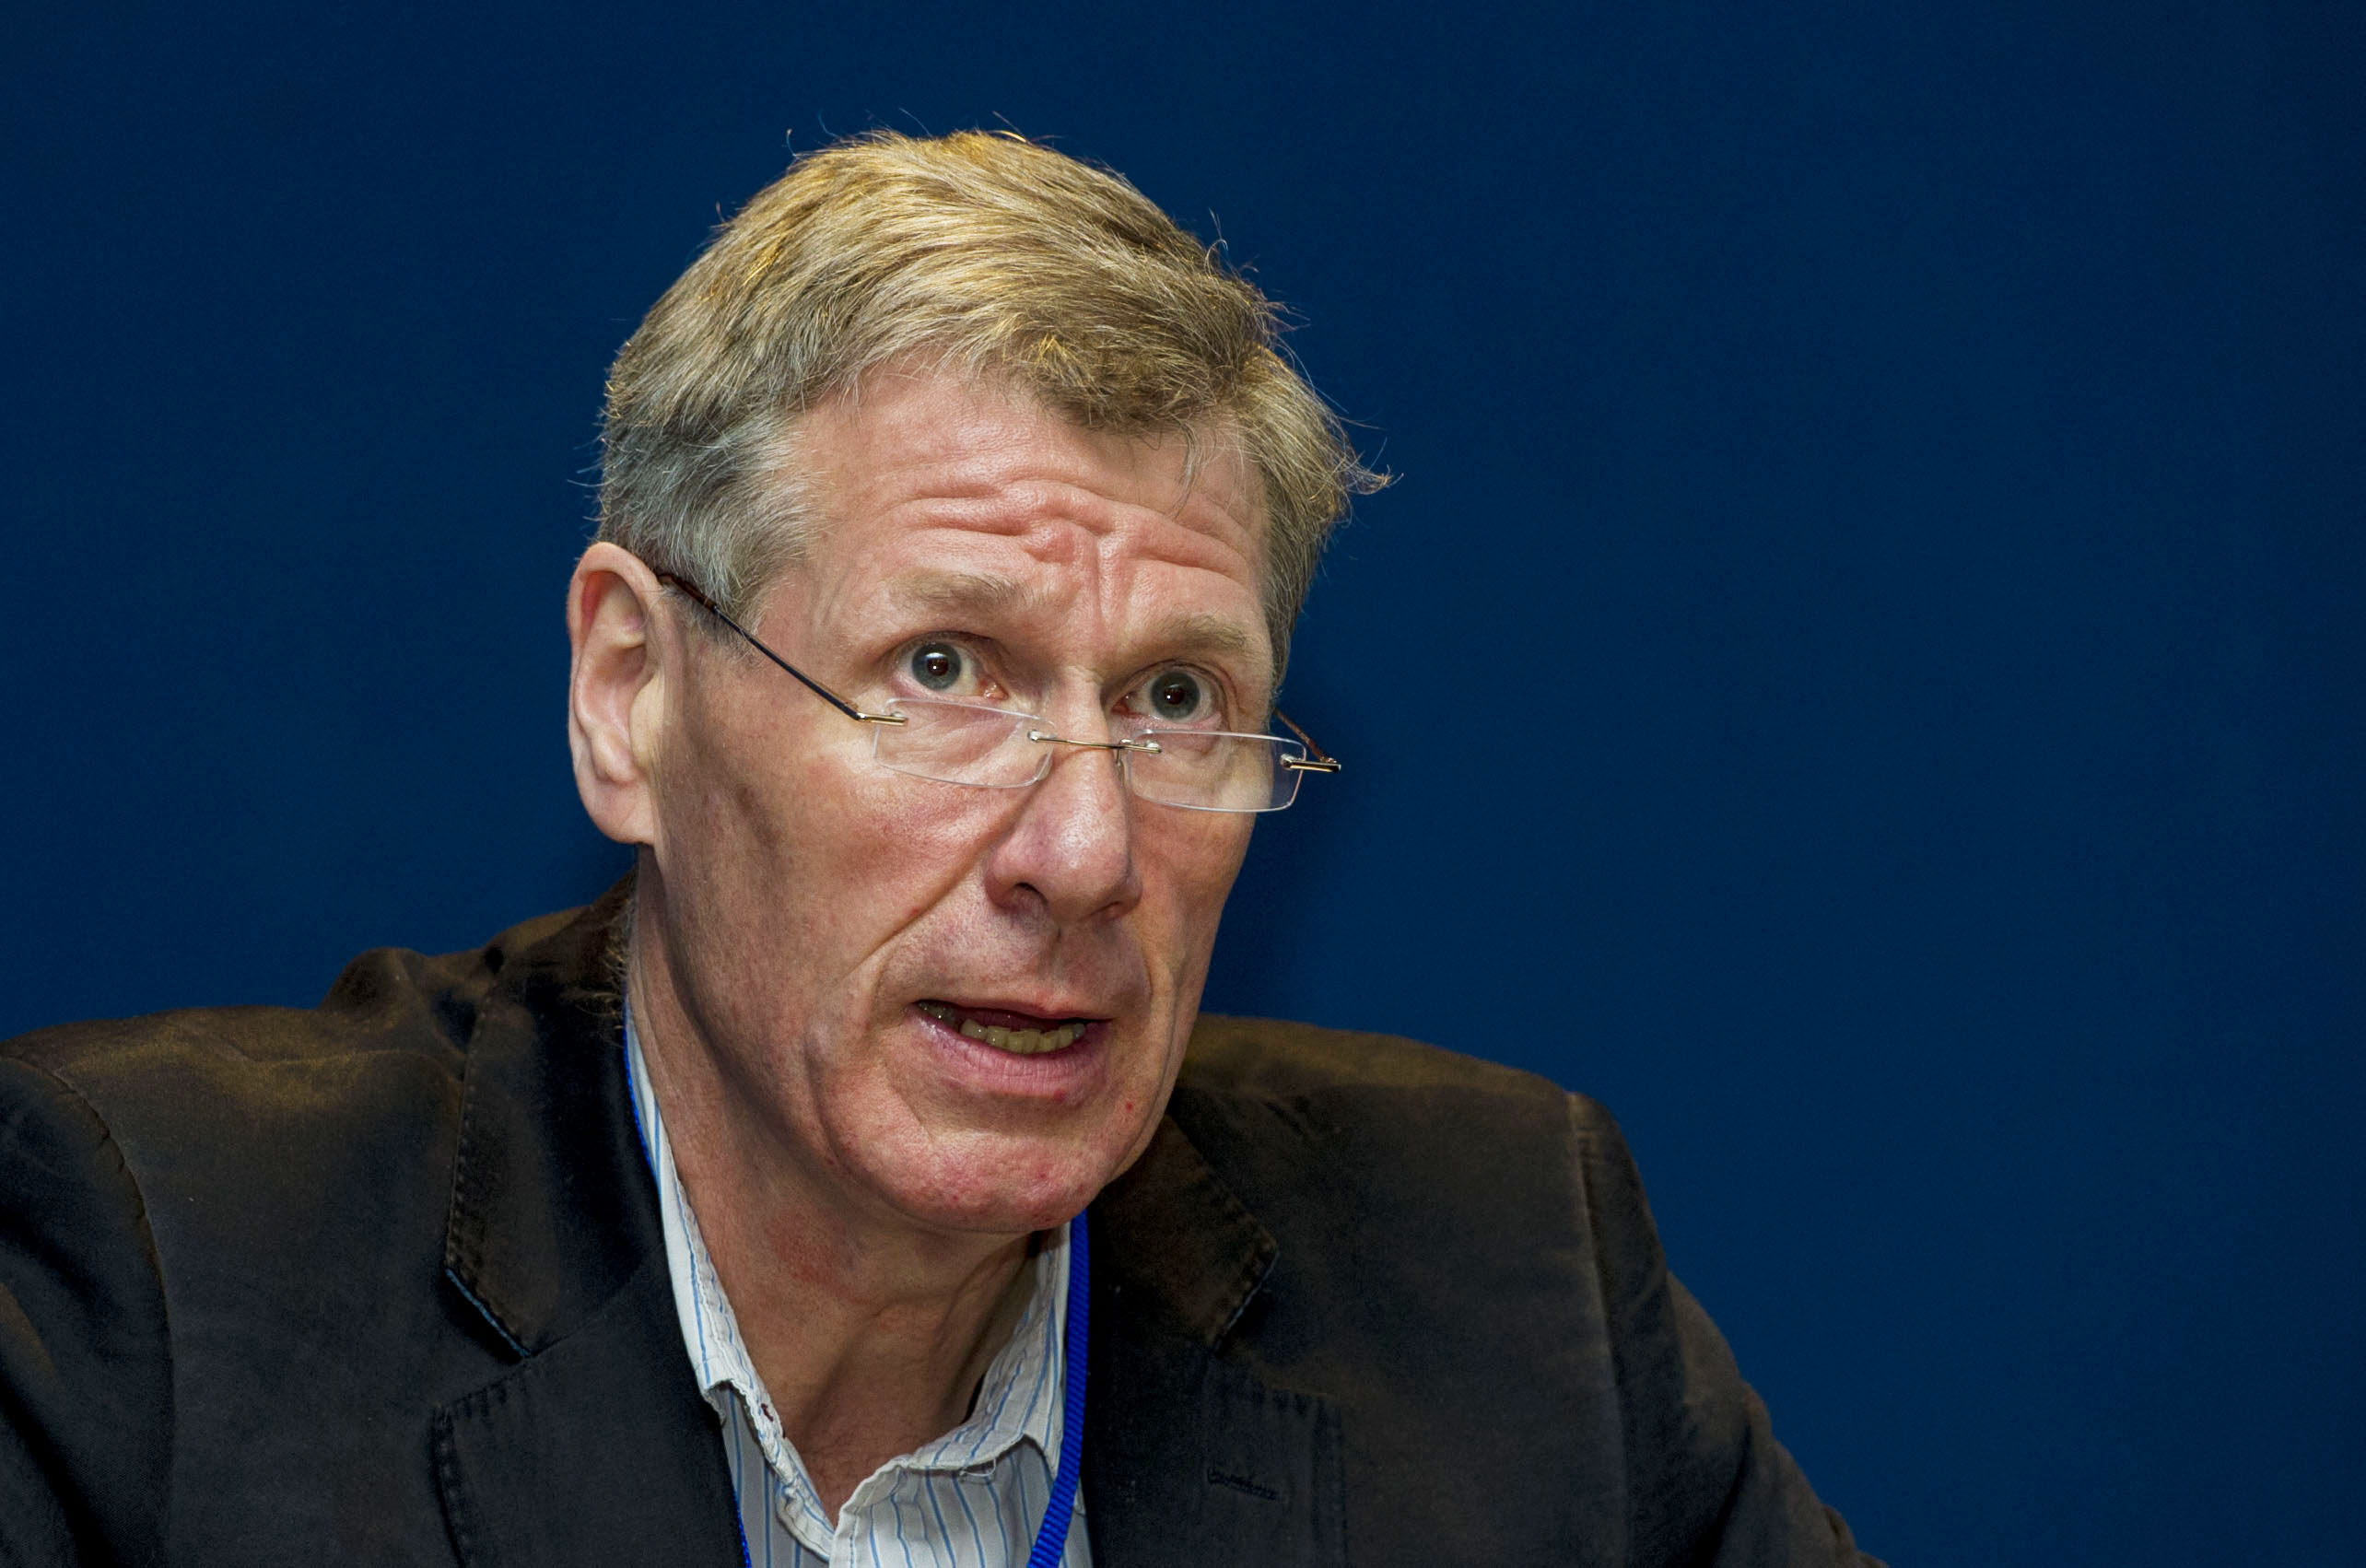 Kenny MacAskill's remarks as a former justice secretary were without precedent.